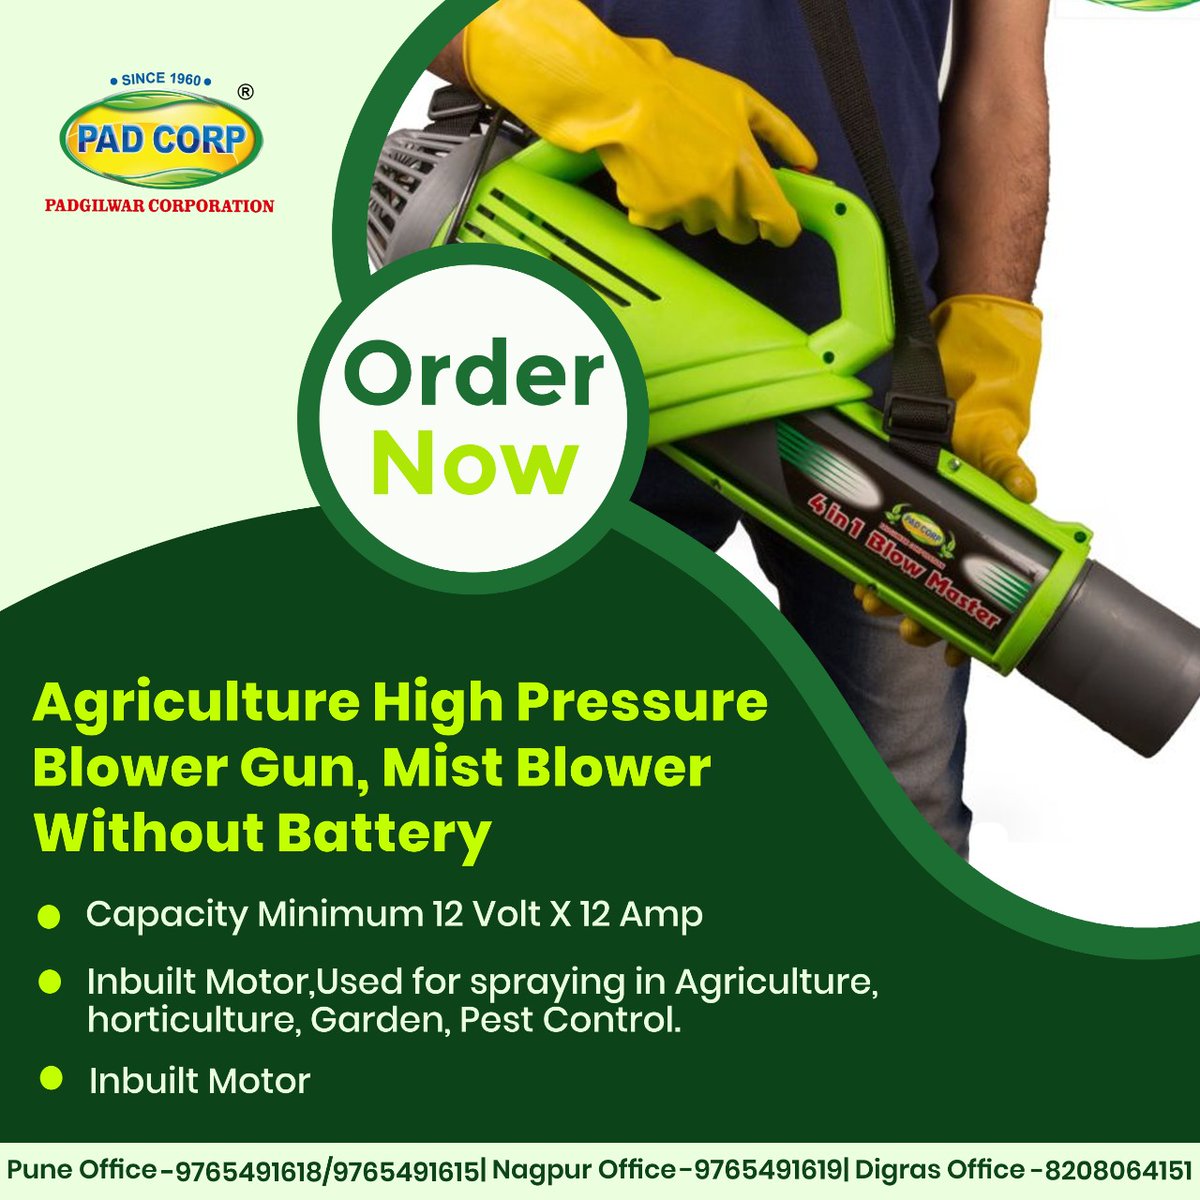 Agriculture High-Pressure Blower Gun, Mist Blower 
Without Battery Order now from padcrop.in

#IndianEconomy #Technology #ModernFarming #FarmLife #Farming #business #dealers #delearship #success #Comfortabledesign #Farmers #shetkari #MaharashtiranFarmers